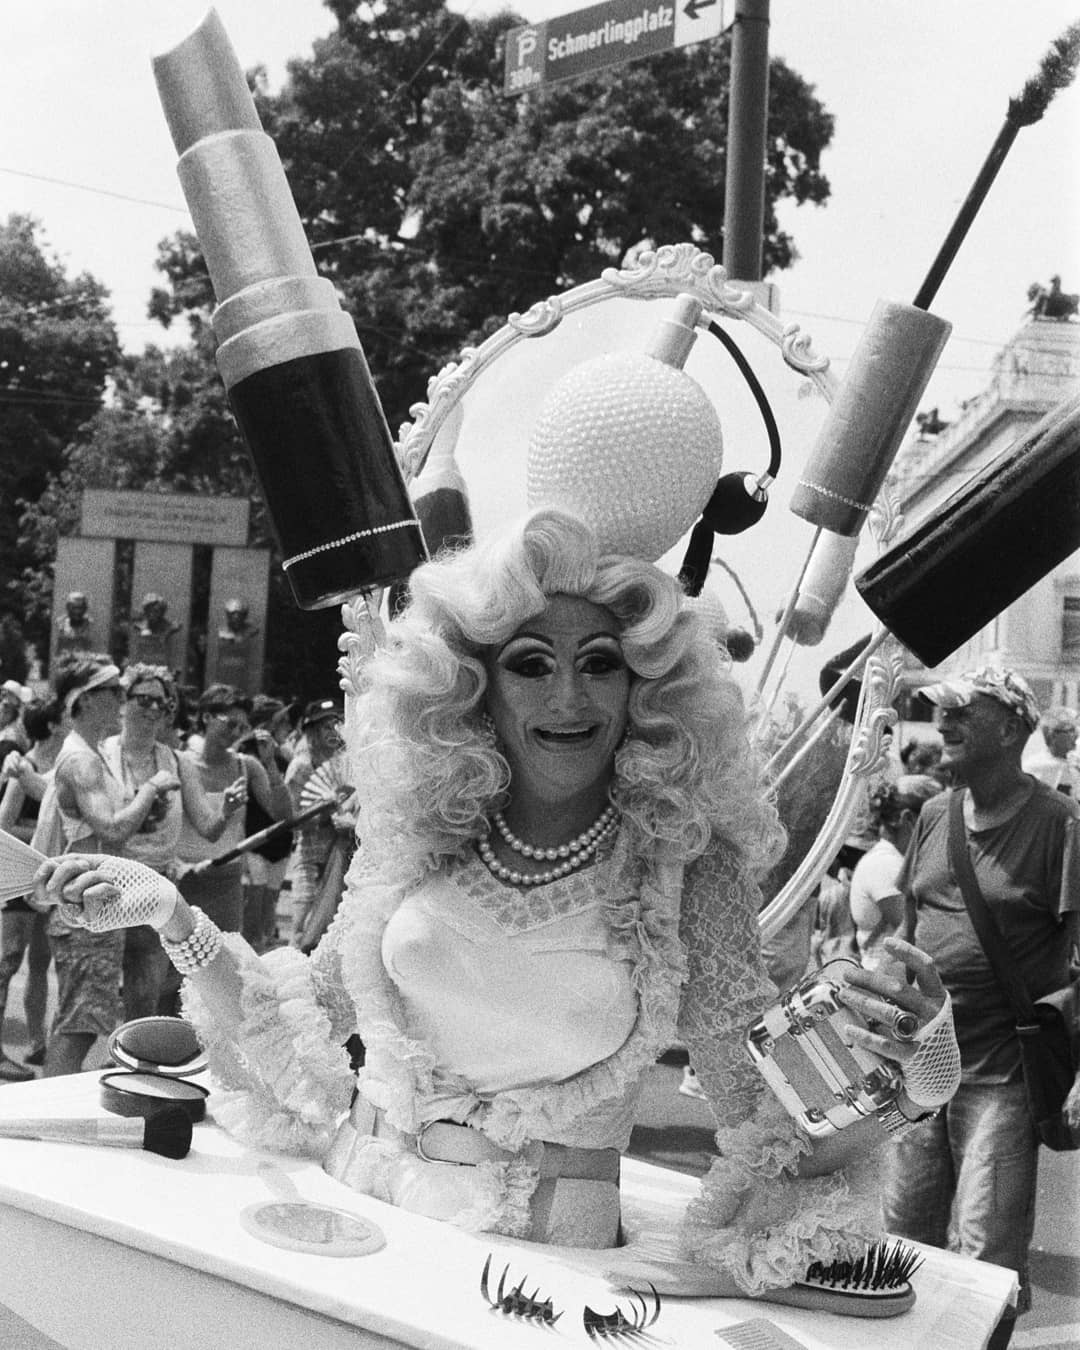  alxhanphoto Feeling fierce and looking forward to Pride celebrations making a return! Here's a shot from World Pride, Vienna 2019. #ilfordphoto #ilfordhp5 #filmphotography #lgbt #pride #blackandwhite #35mmphotography #filmisnotdead #drag #dragqueen #analogphotography #analoguevibes #filmisalive #35mmfilm #vienna #fridayfavourites #fiercefilm